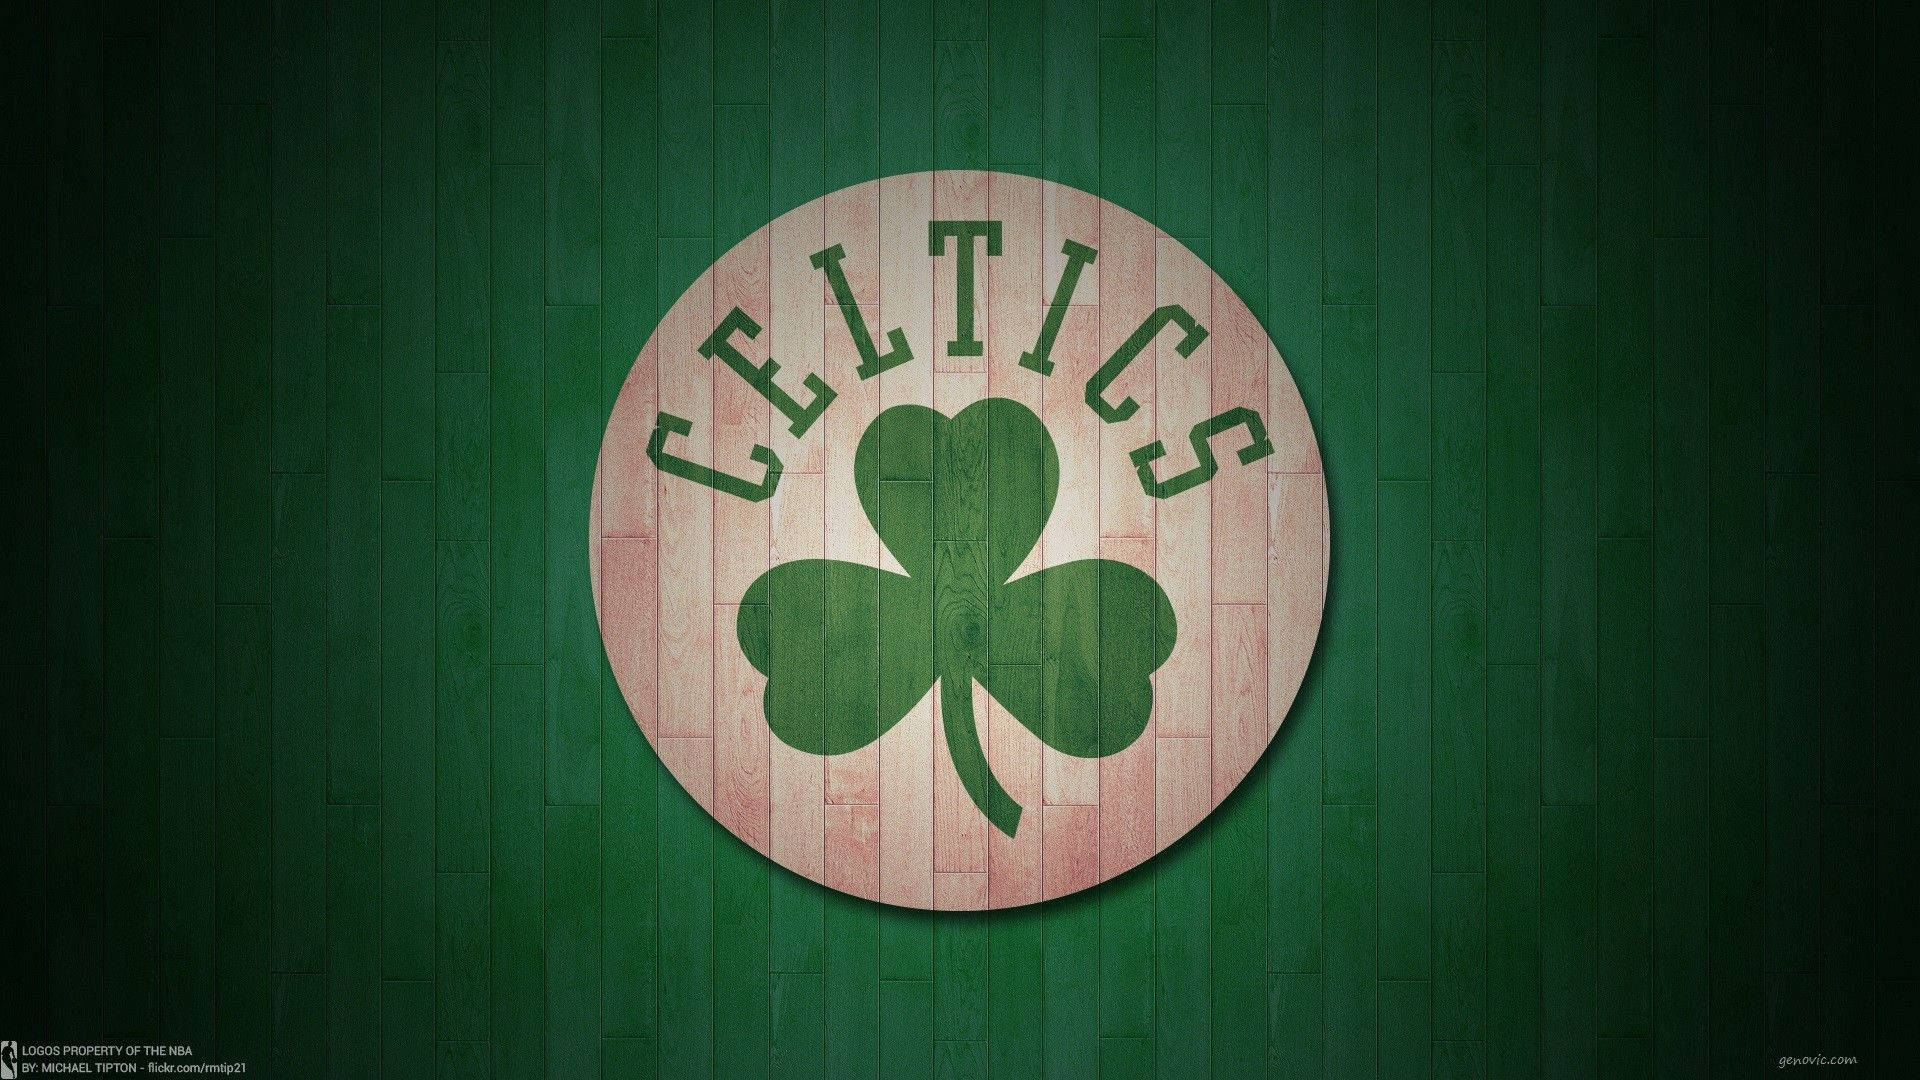 Dynamic Action At The Boston Celtics Game Wallpaper